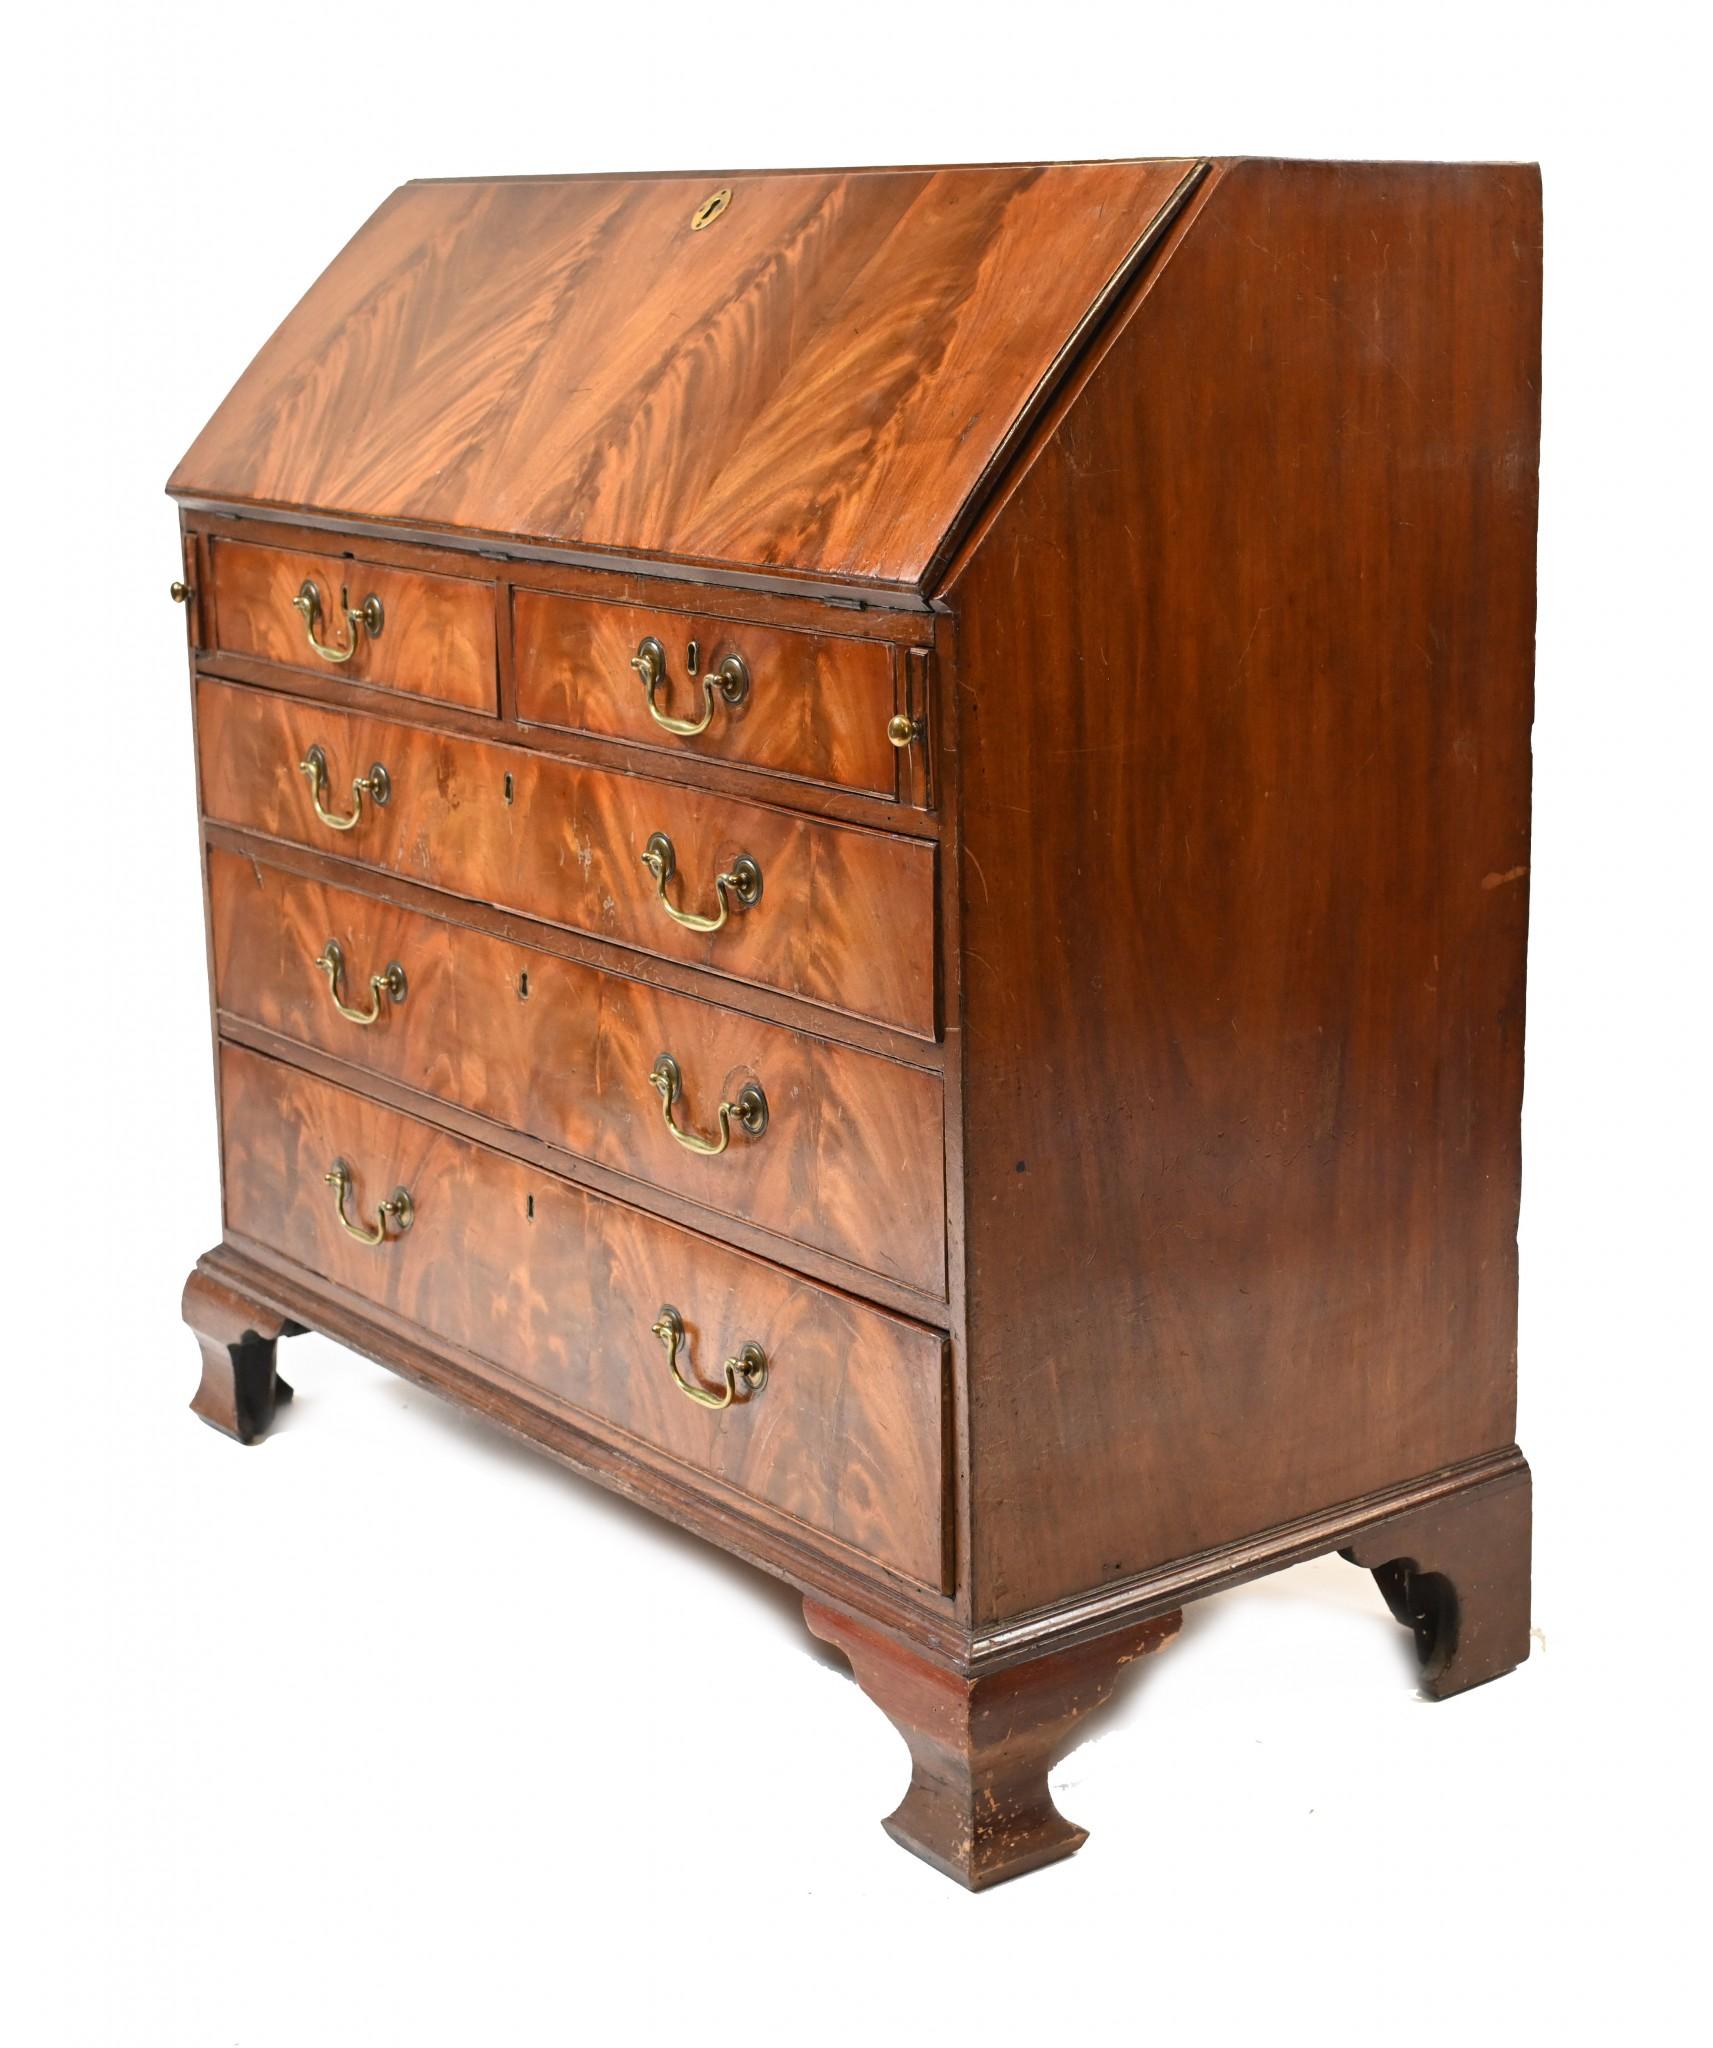 Gorgeous George III bureau with original brass handles
Stands on oggee bracket feet with fitted interior
Top opens out to reveal green felt writing surface surrounded by drawers and cubby holes
Great patina to the flame mahogany
Circa 1790 on